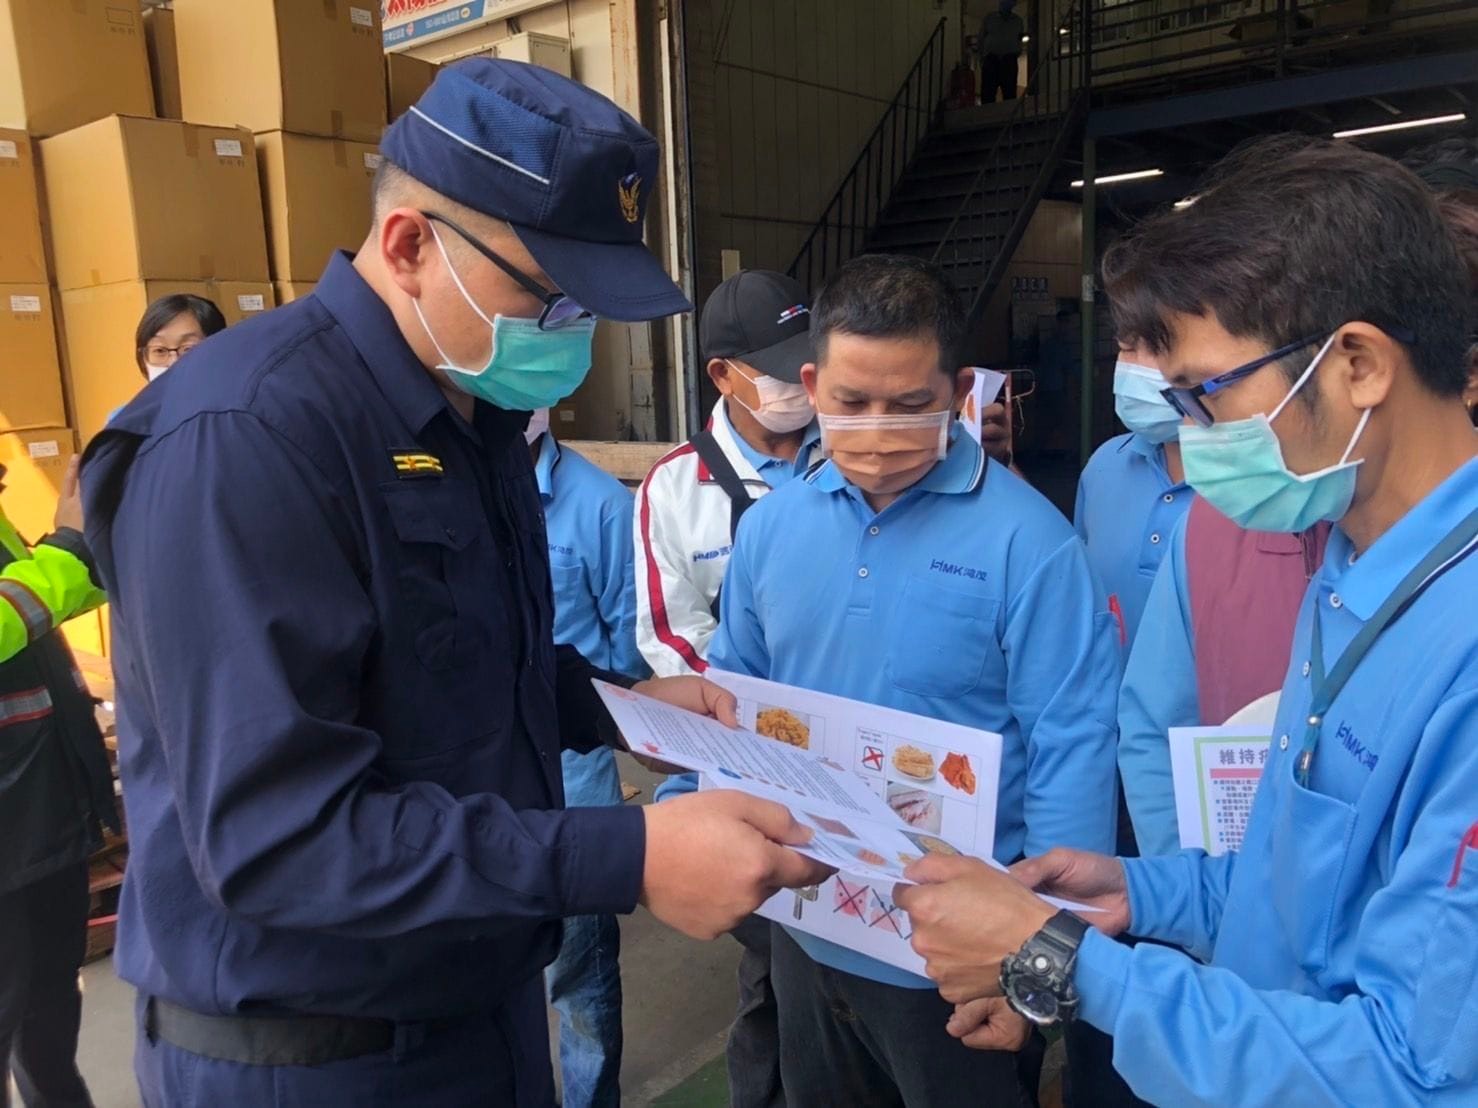 The police officer of Dounan Precinct, Yunlin County Police Bureau promoted “Keep African swine fever at bay” to migrant workers. (Photo / Provided by the police officer of Dounan Precinct, Yunlin County Police Bureau)